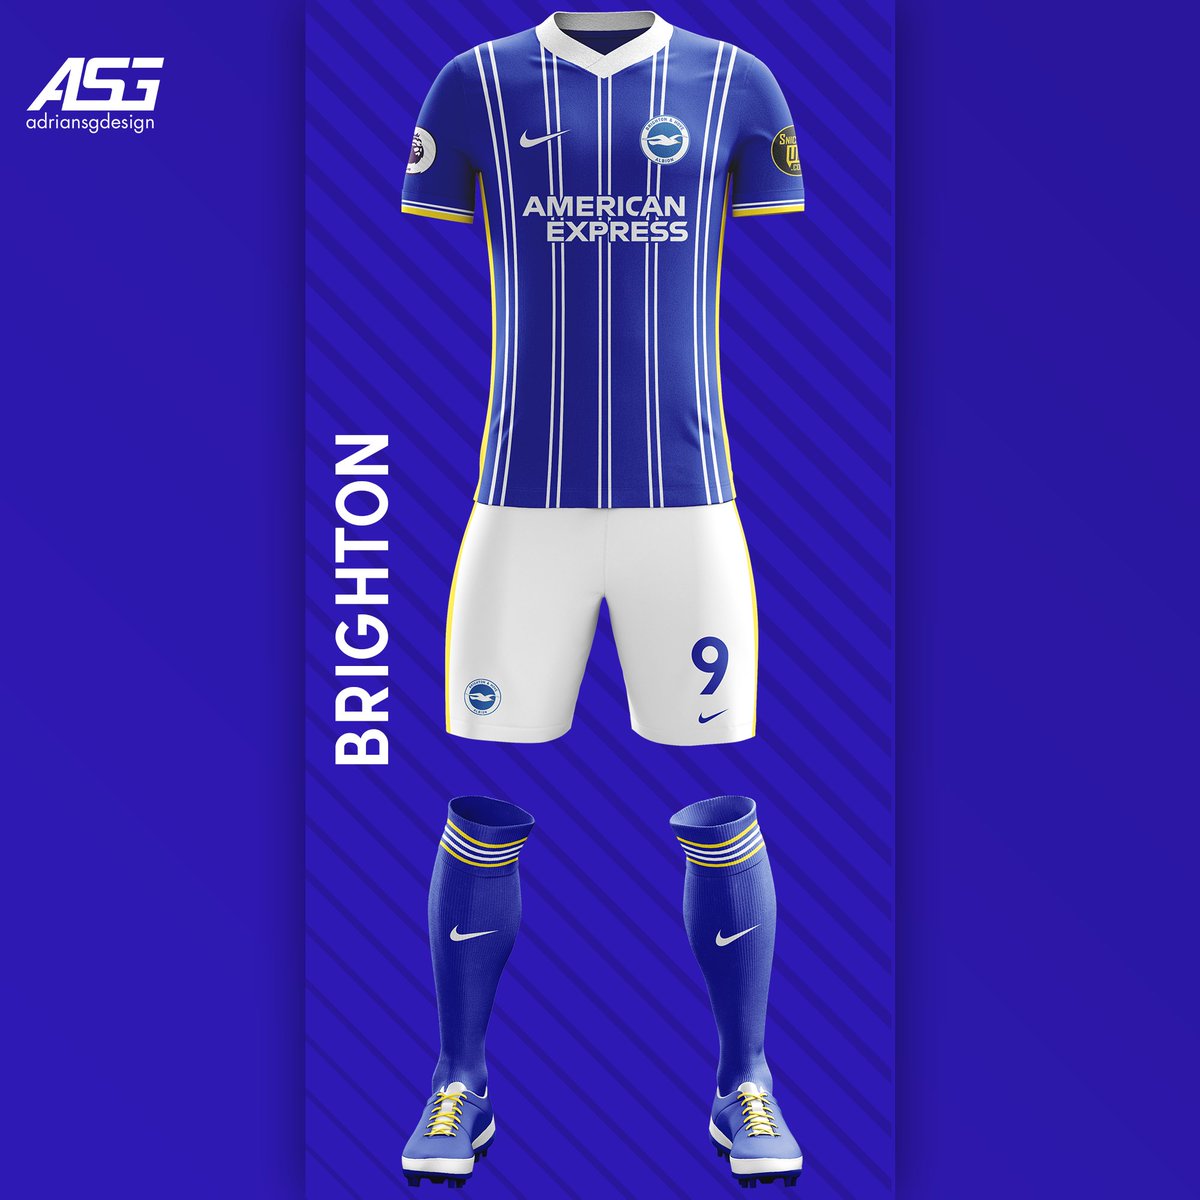 Brighton  @OfficialBHAFC An evolution of last season's kit, this new kit has double pinstripe lines with yellow instead of gold.